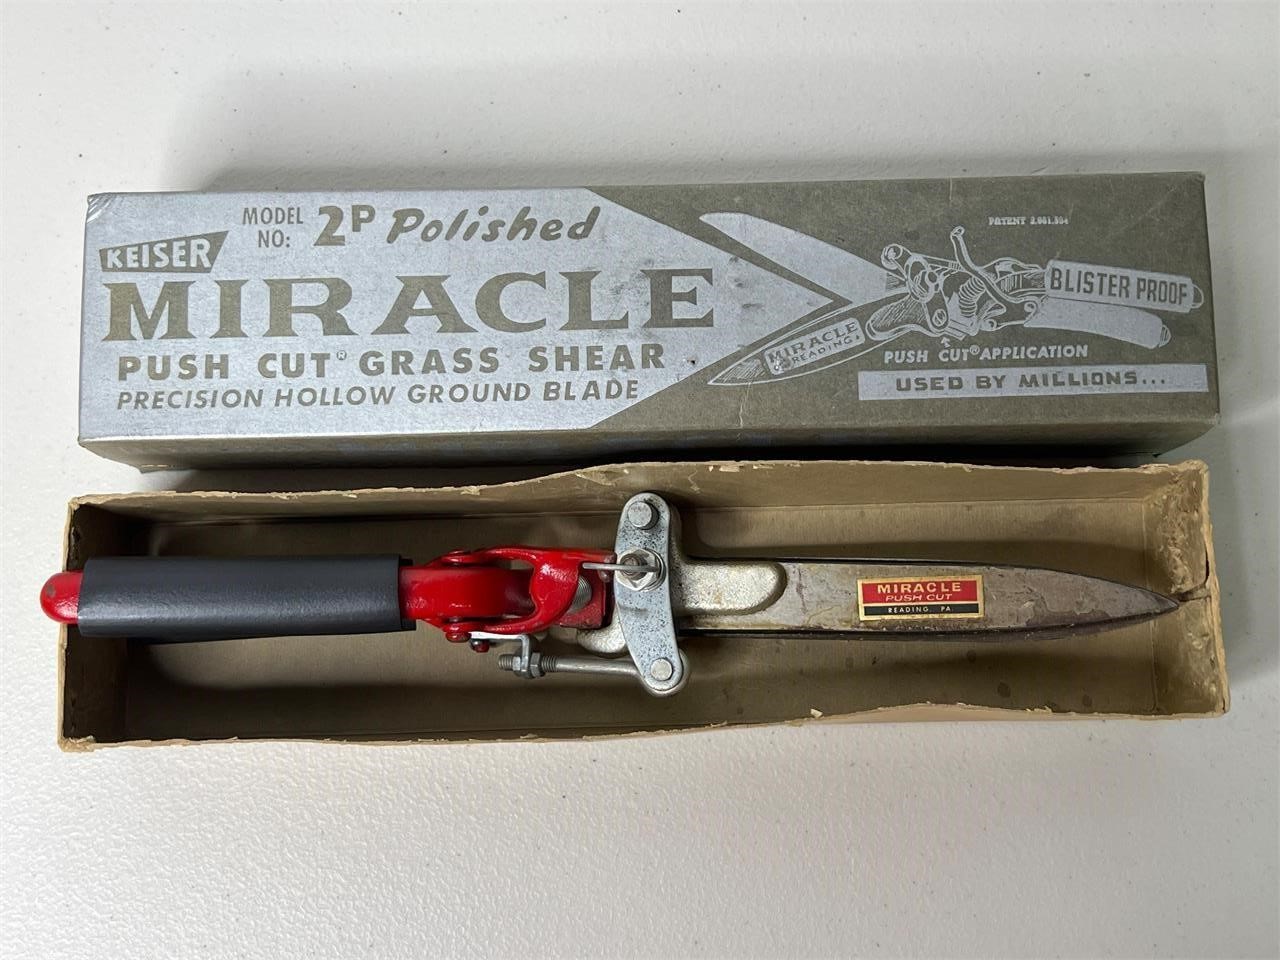 Vintage Keiser Miracle Grass Shears in Box